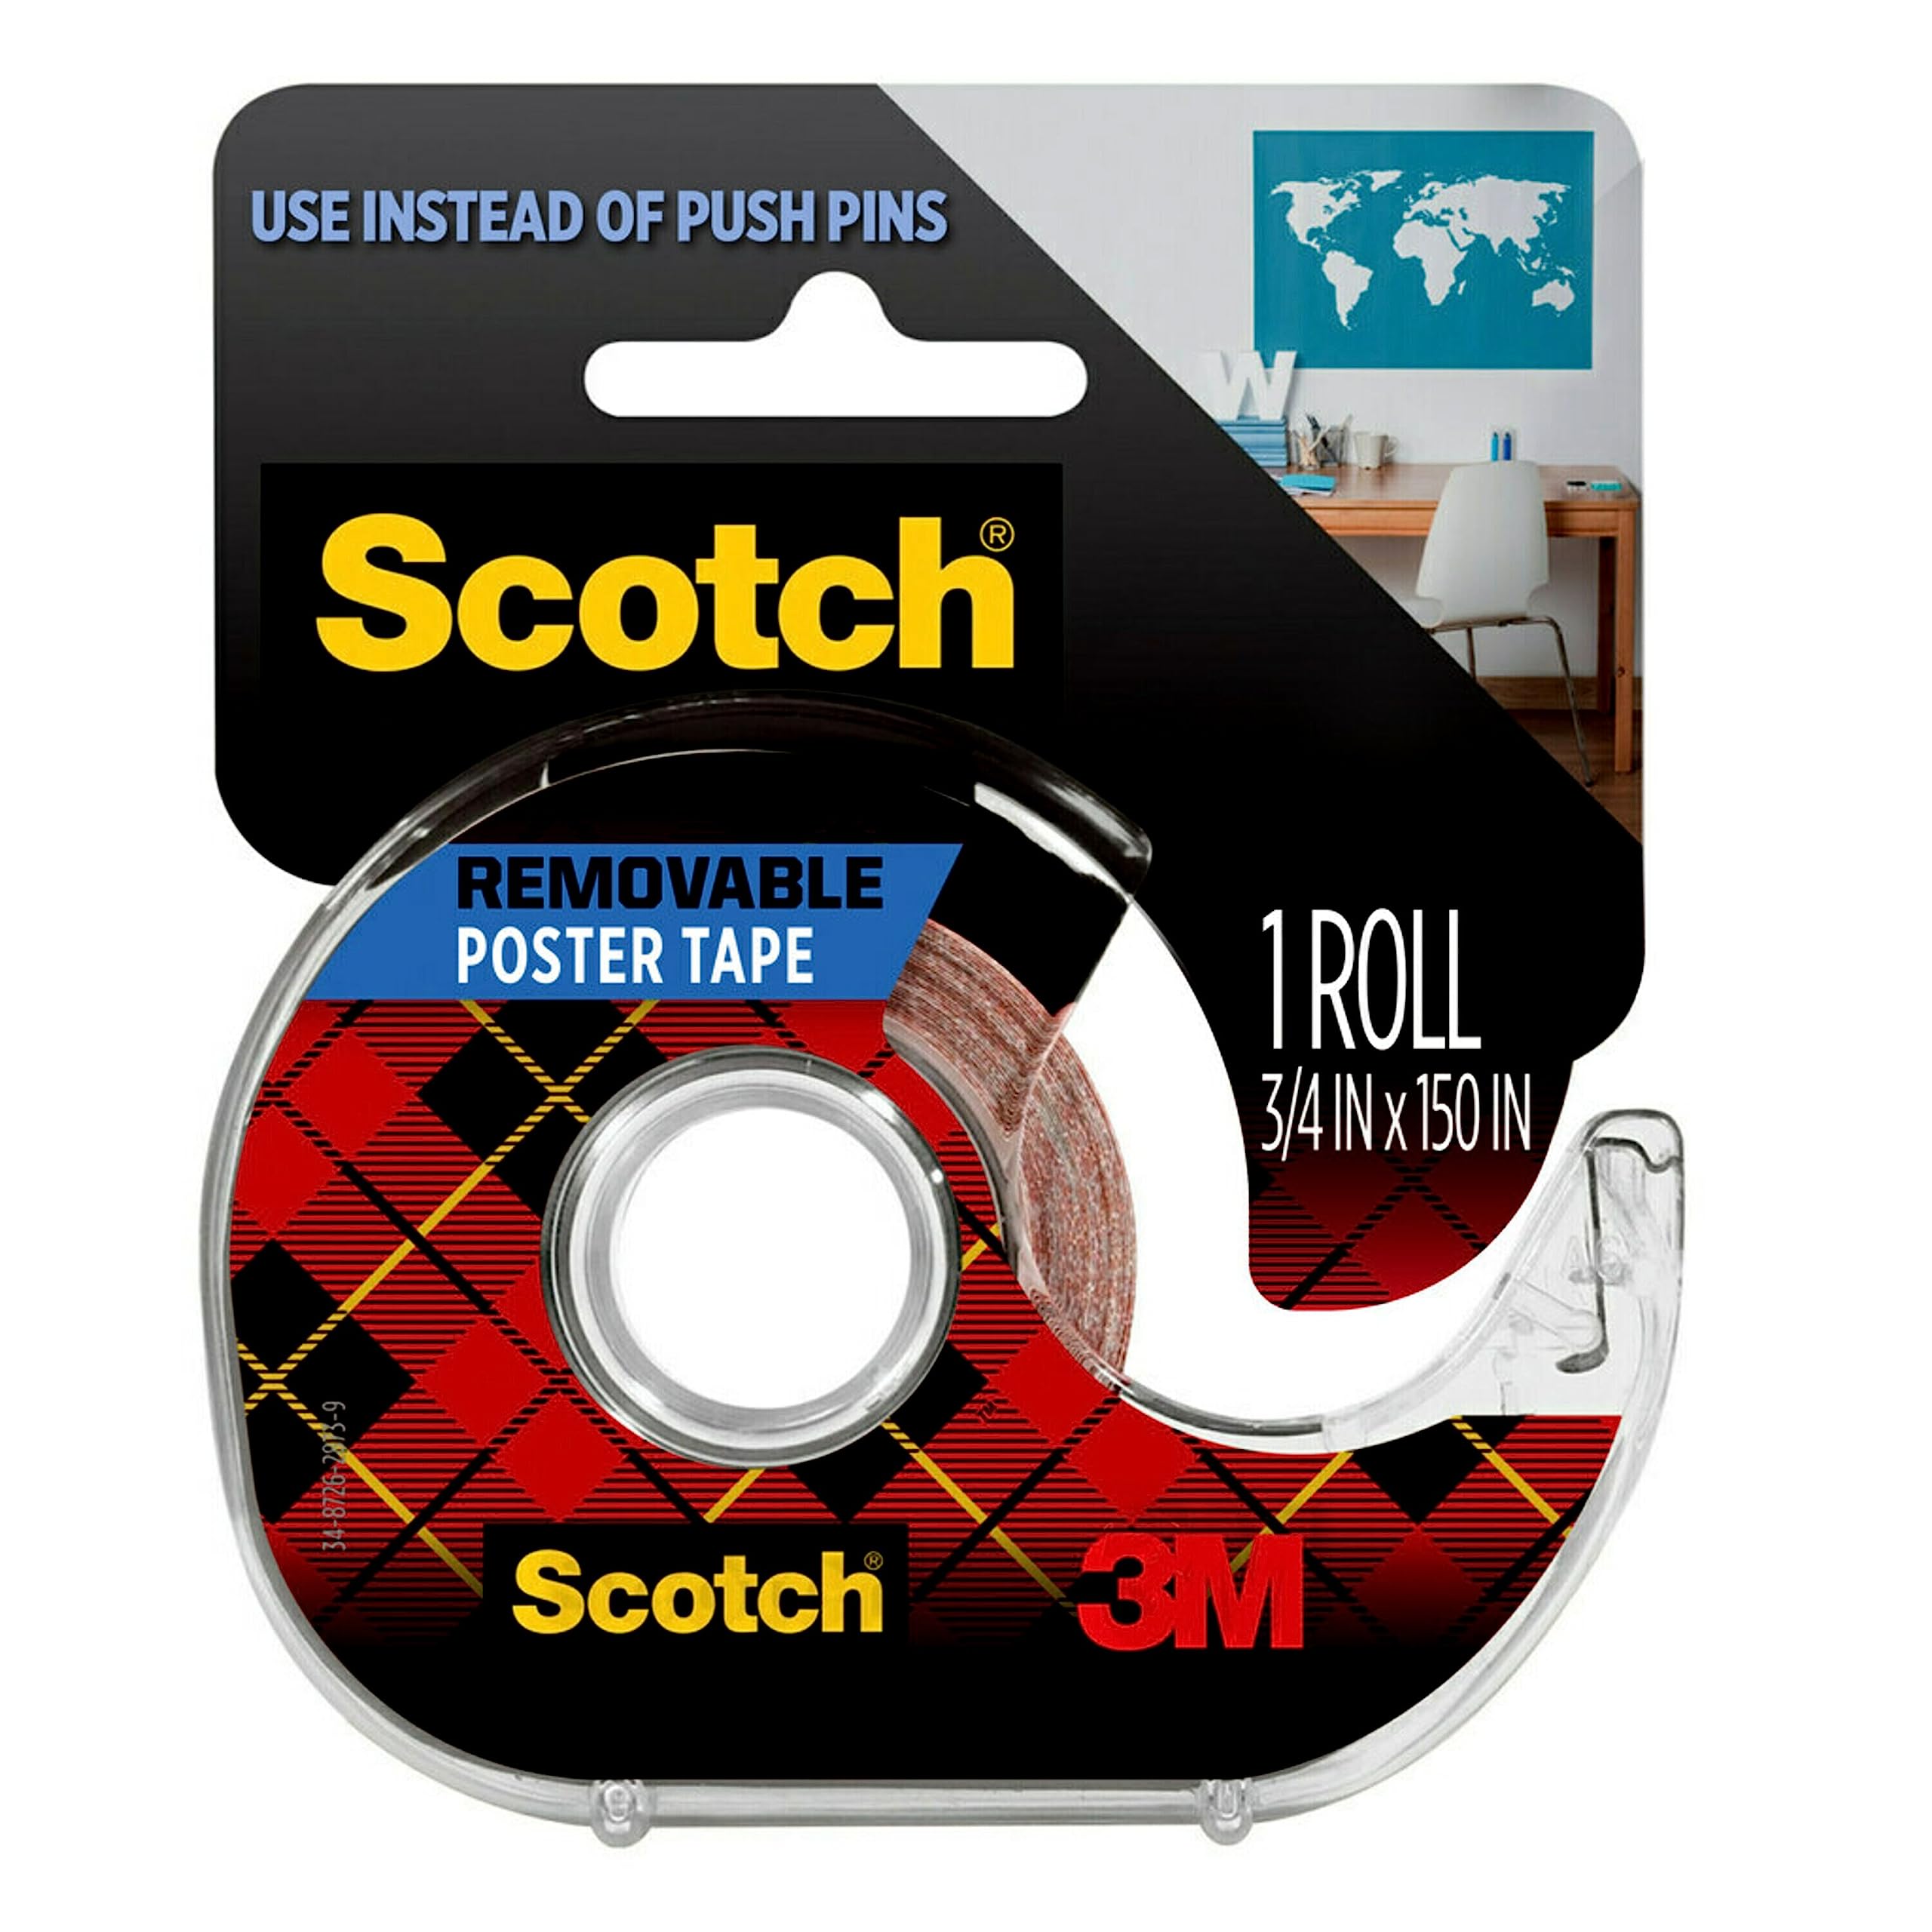 Scotch-Mount Extreme Double-Sided Mounting Tape Mega Roll 414H